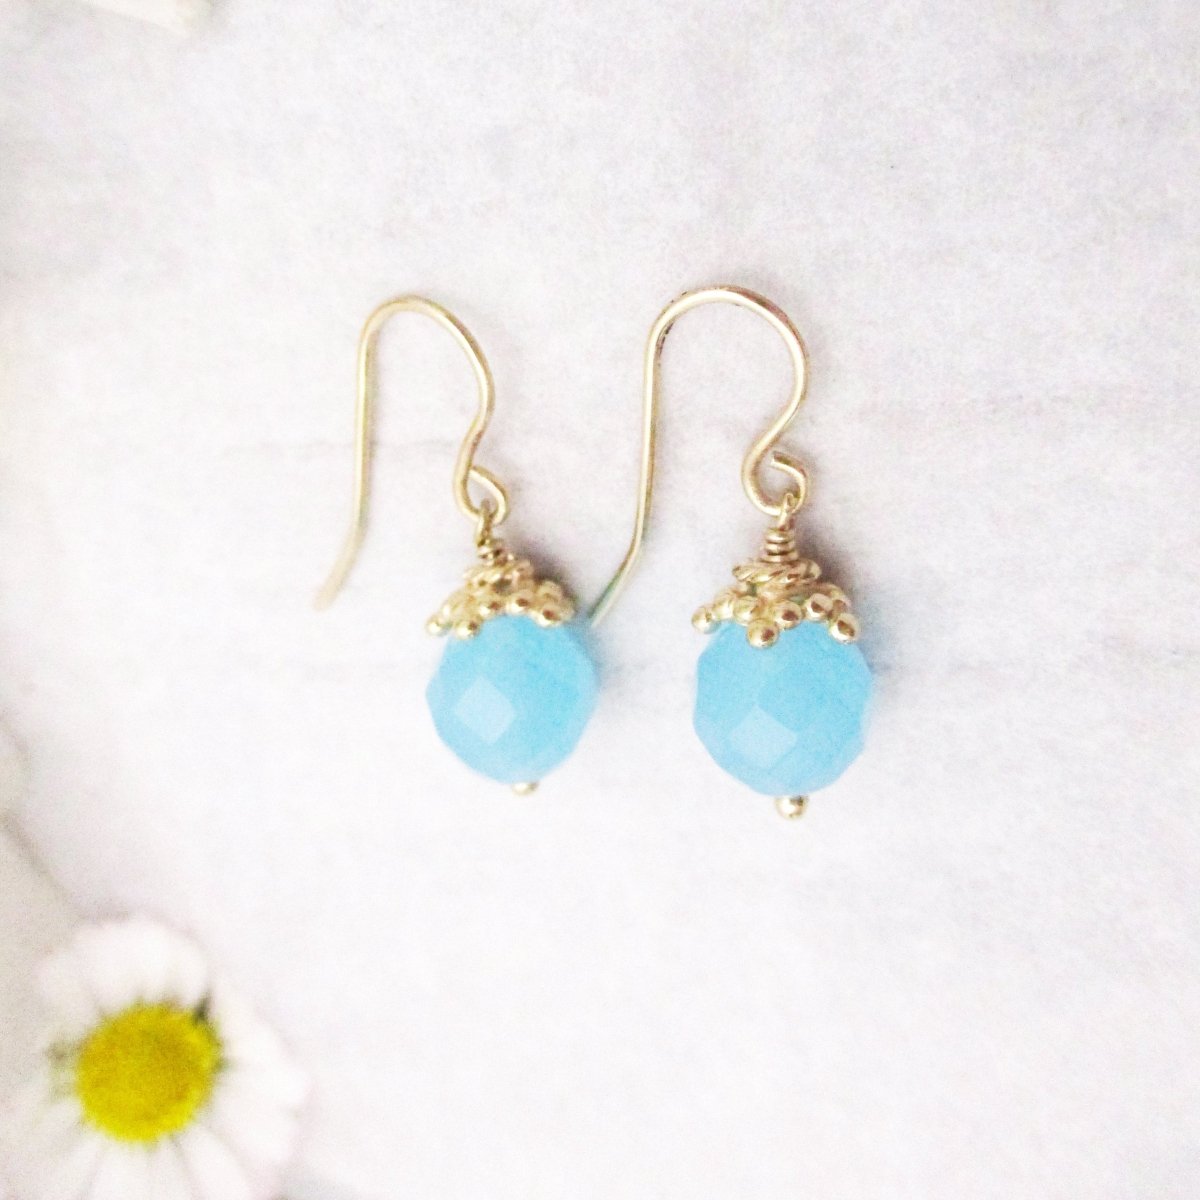 Turquoise Quartz Star Crowned Hook Earrings Choose Solid 14k Gold Or Silver - Luxe Design Jewellery